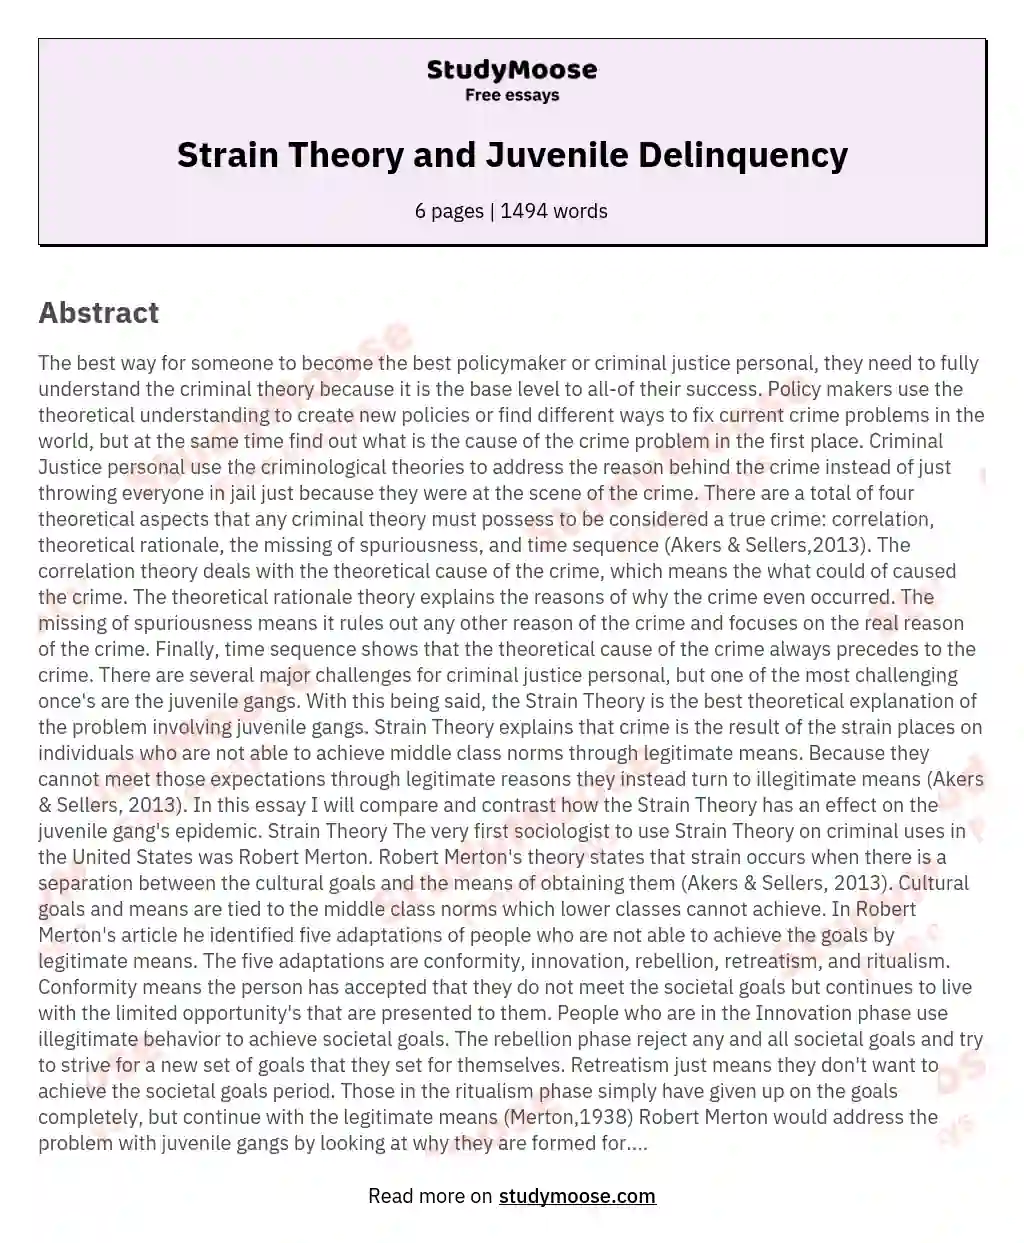 Strain Theory and Juvenile Delinquency essay